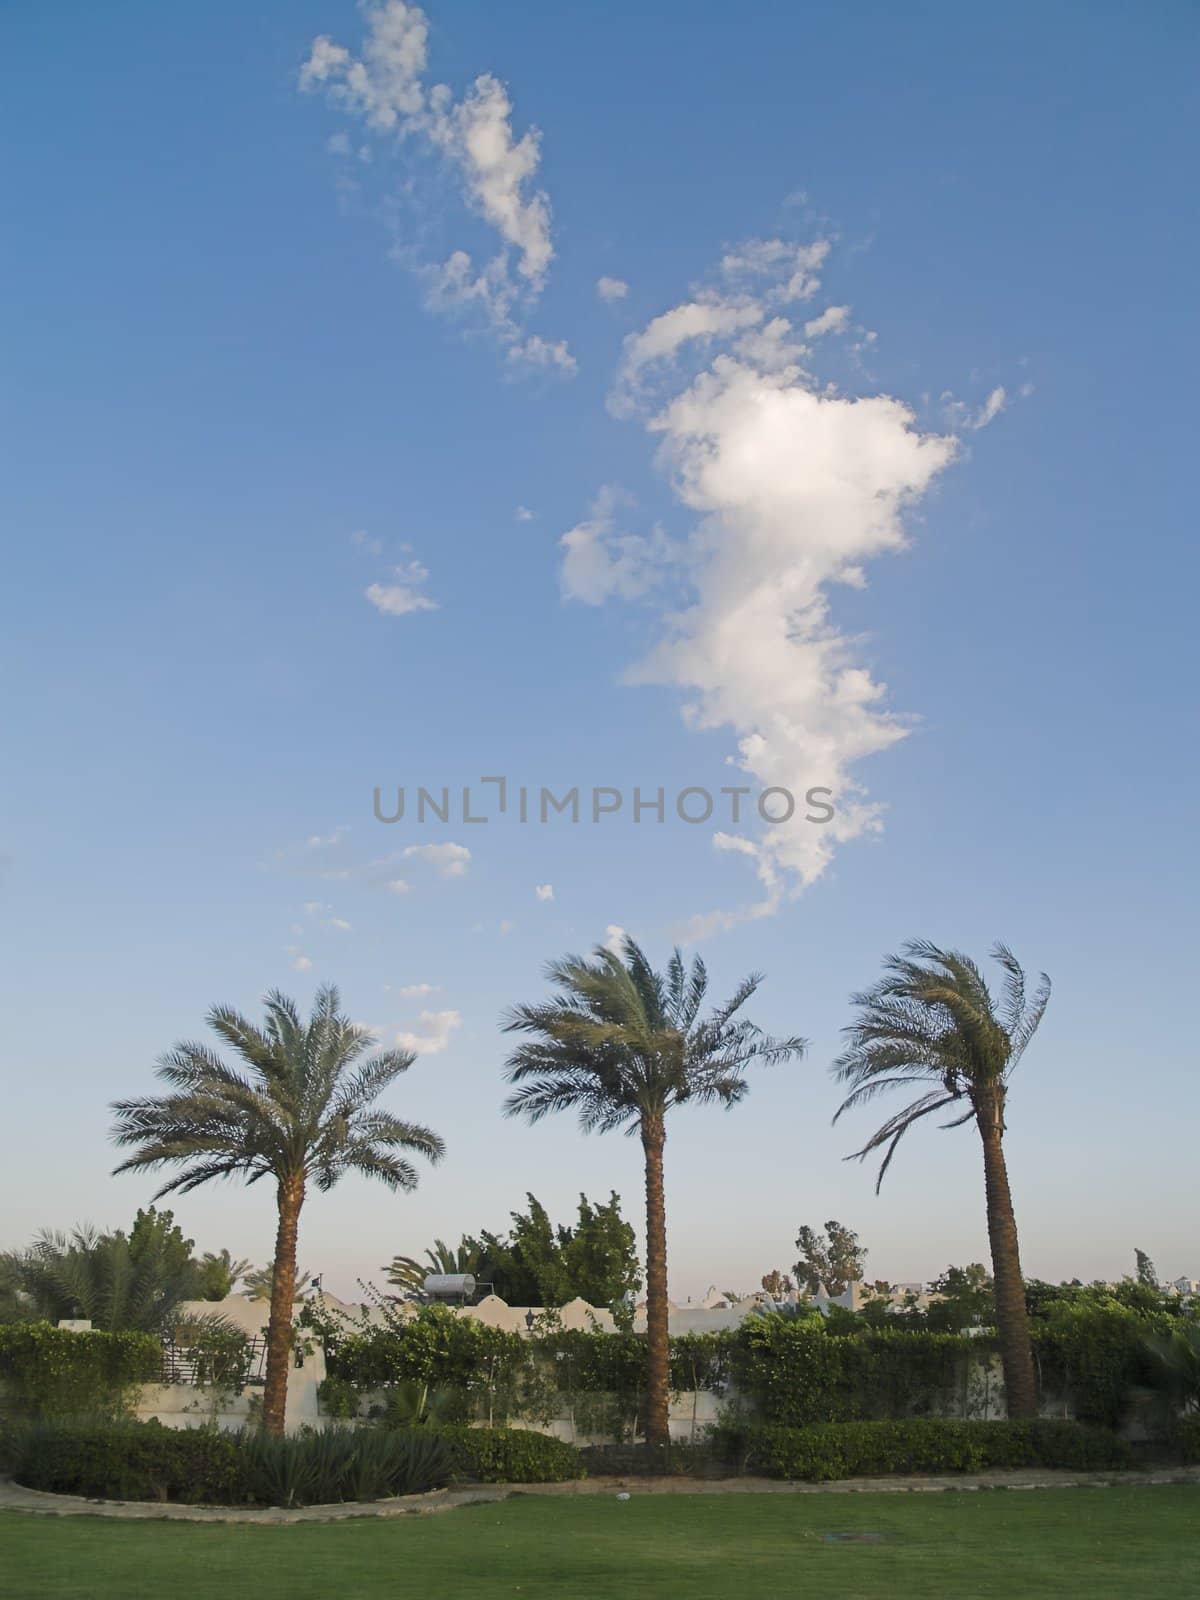 Tree palms. One cloud above the palms. Vertical